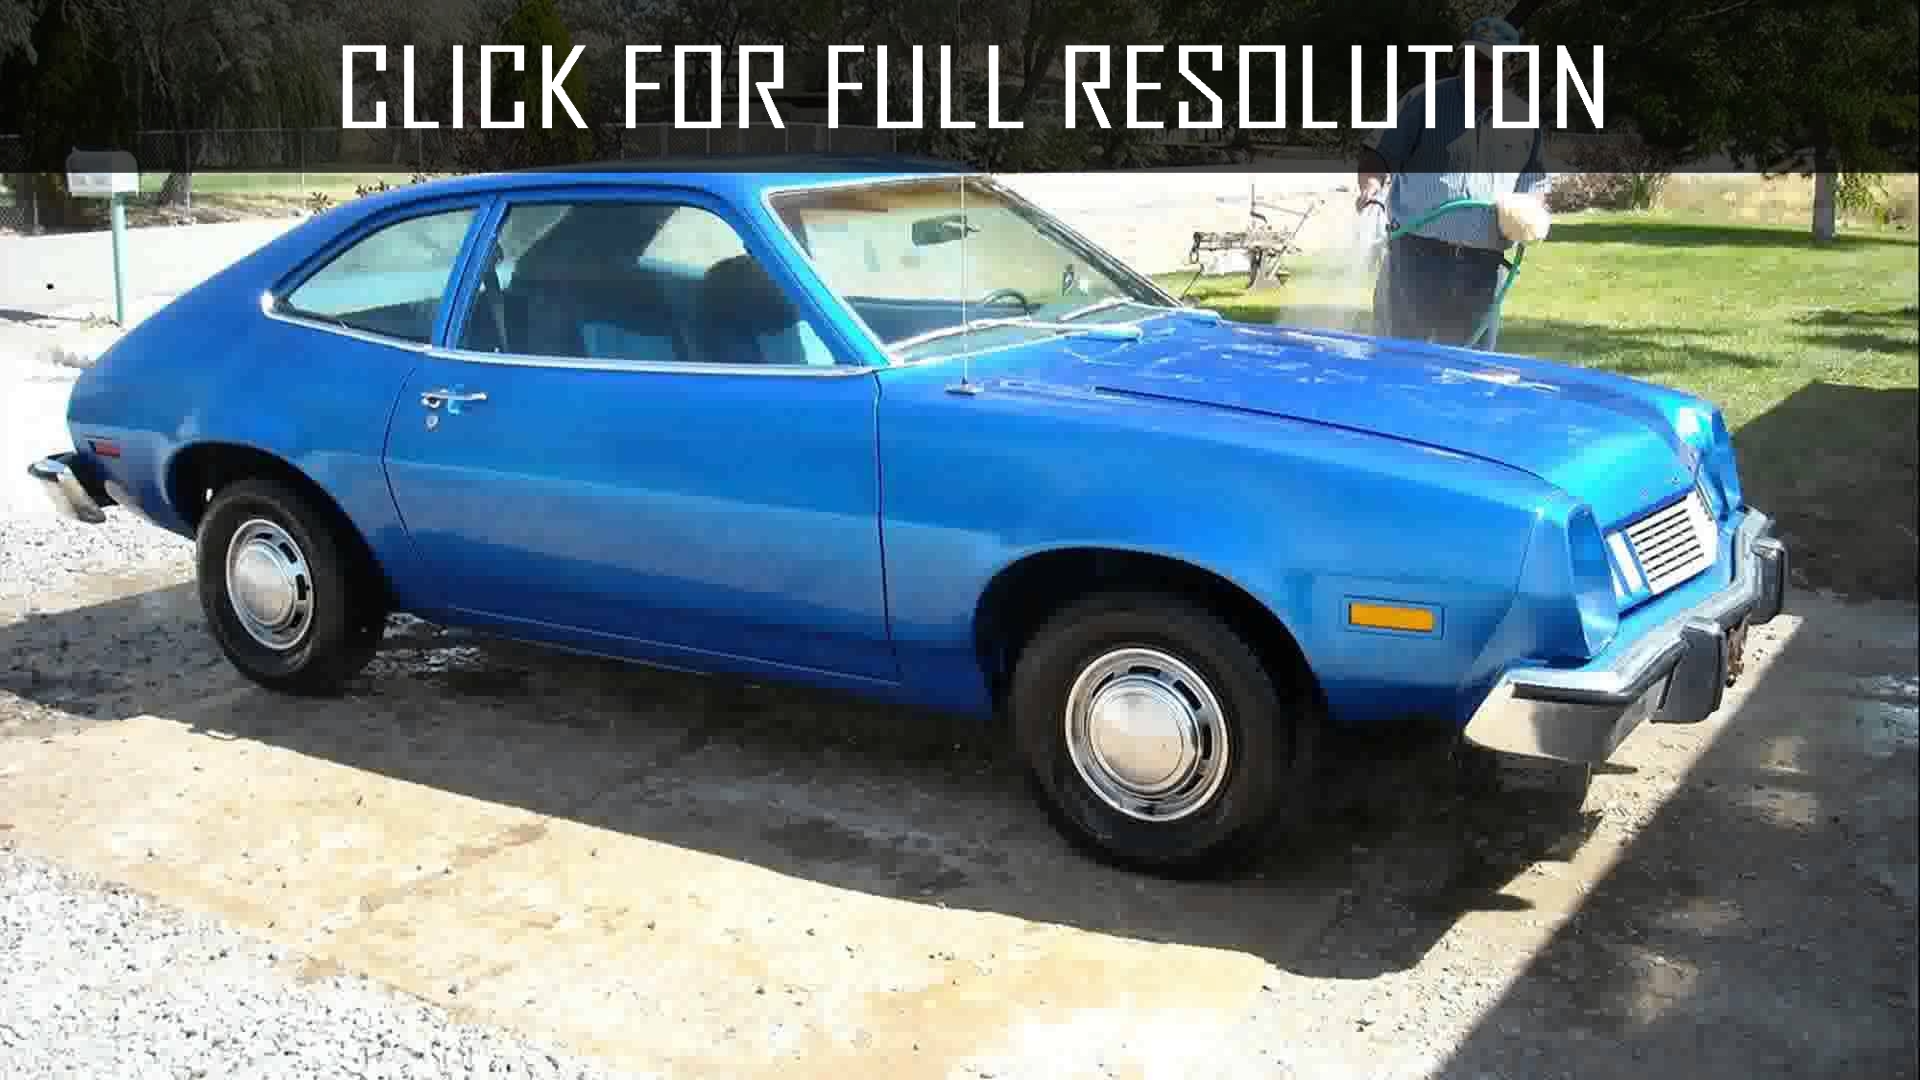 Ford Pinto 1980